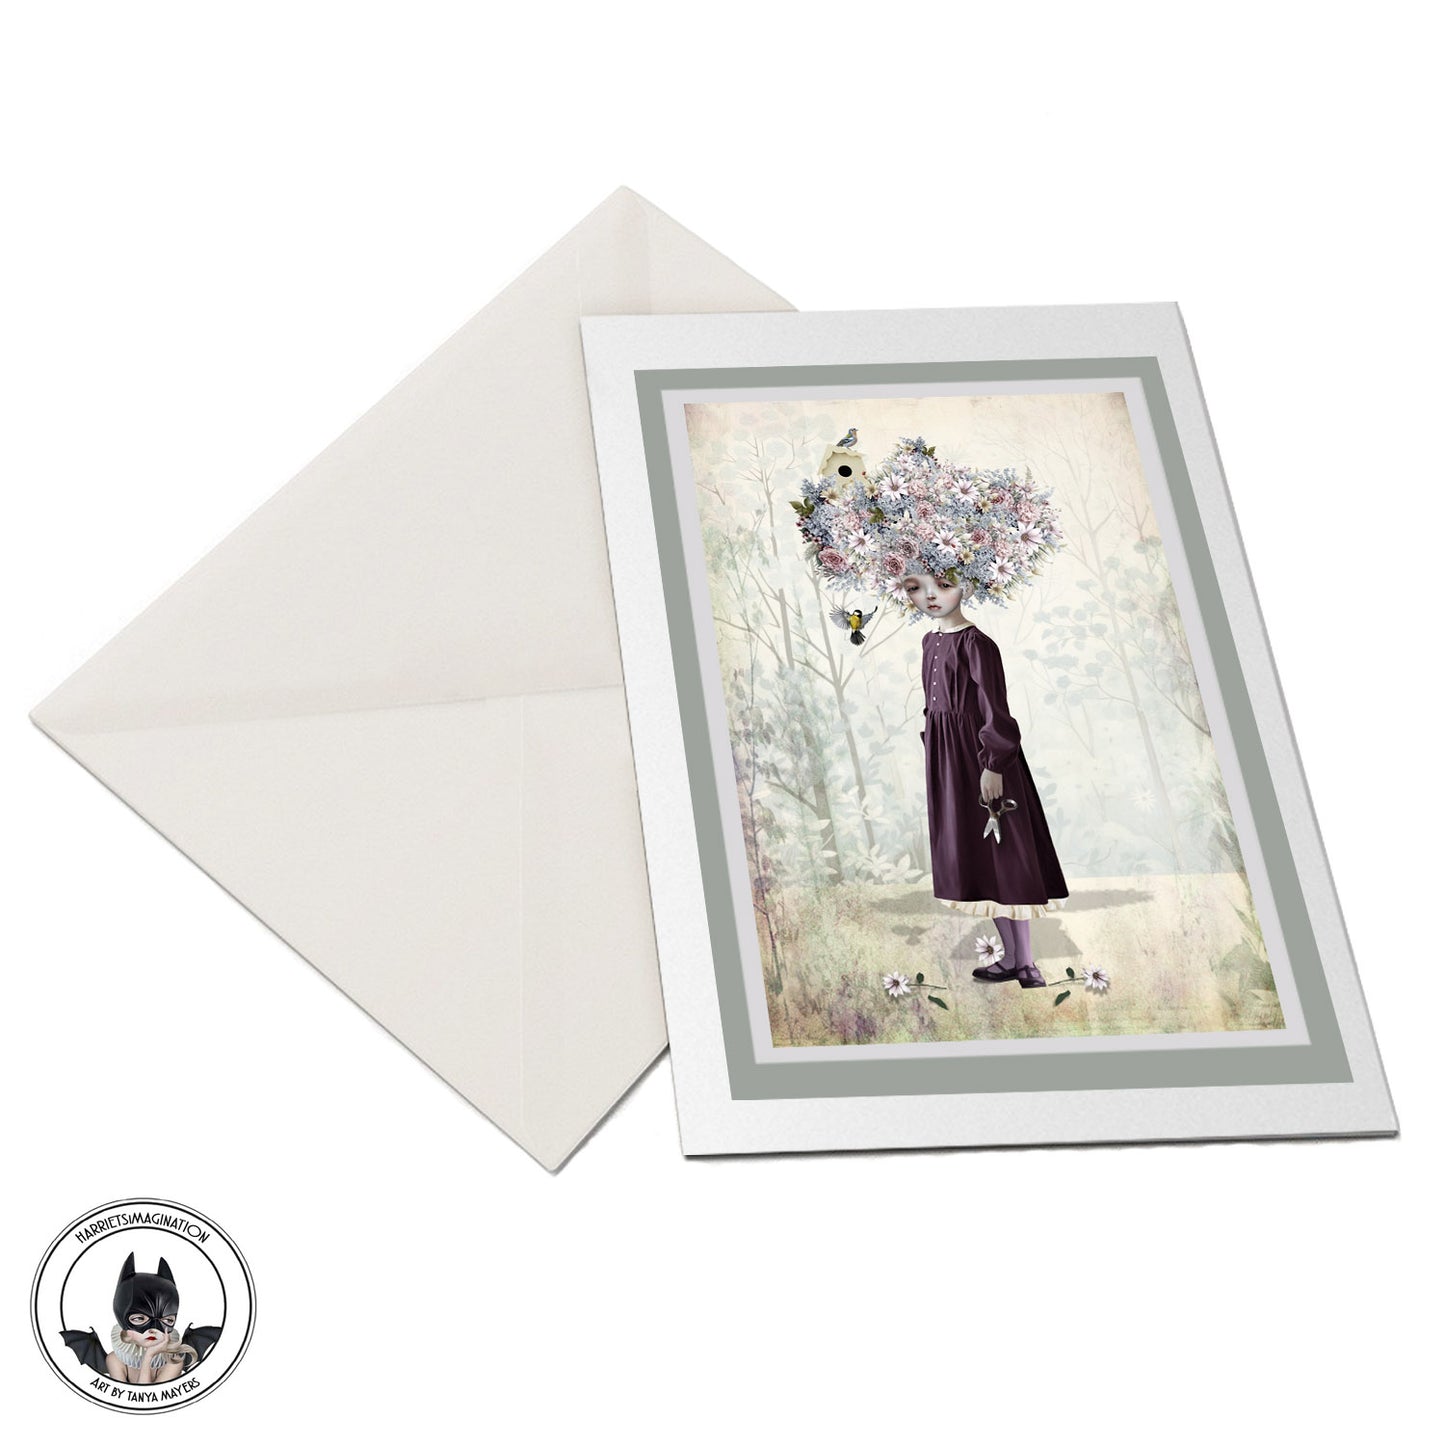 Flower Girl Art Greeting Card - Her Crown And Glory